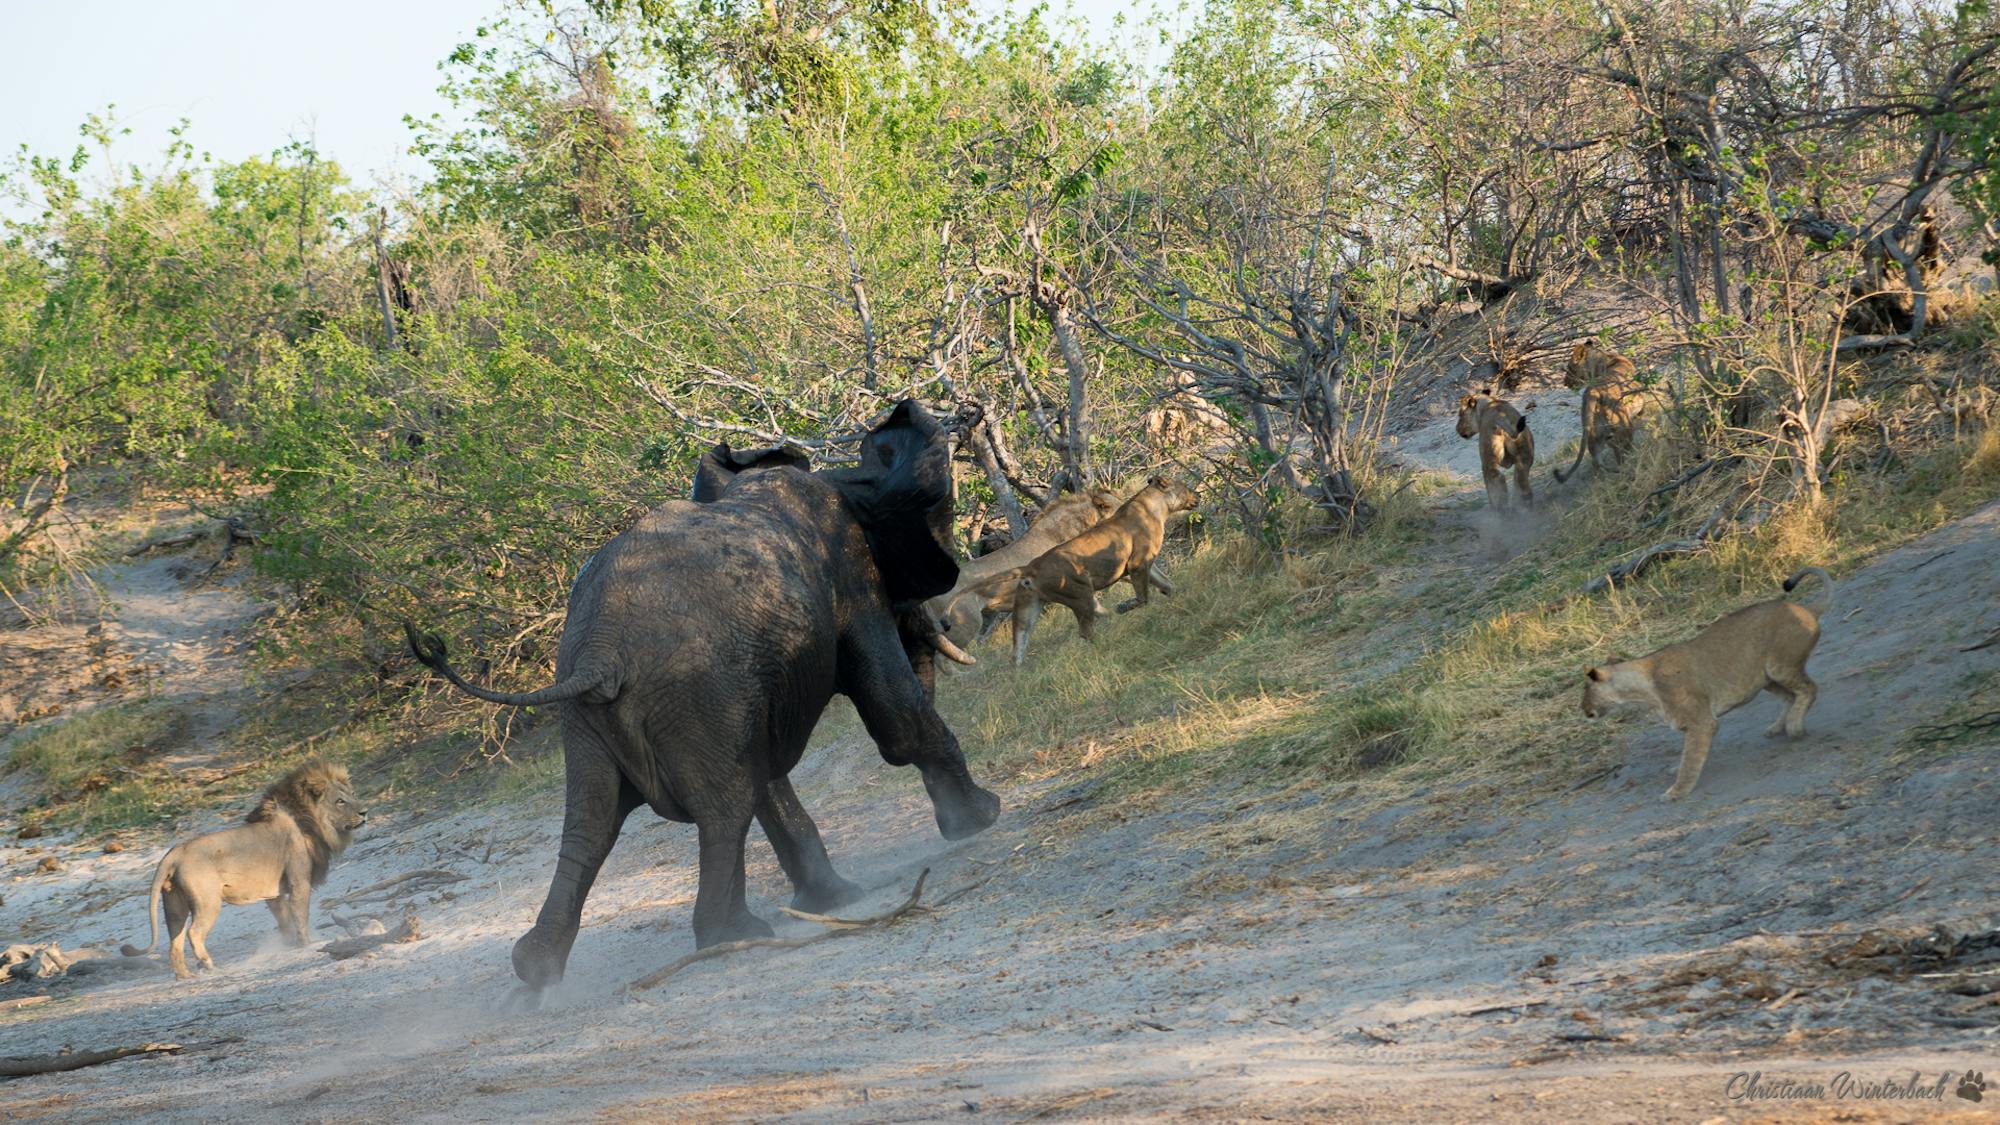 An elephant chasing lions in the African bush